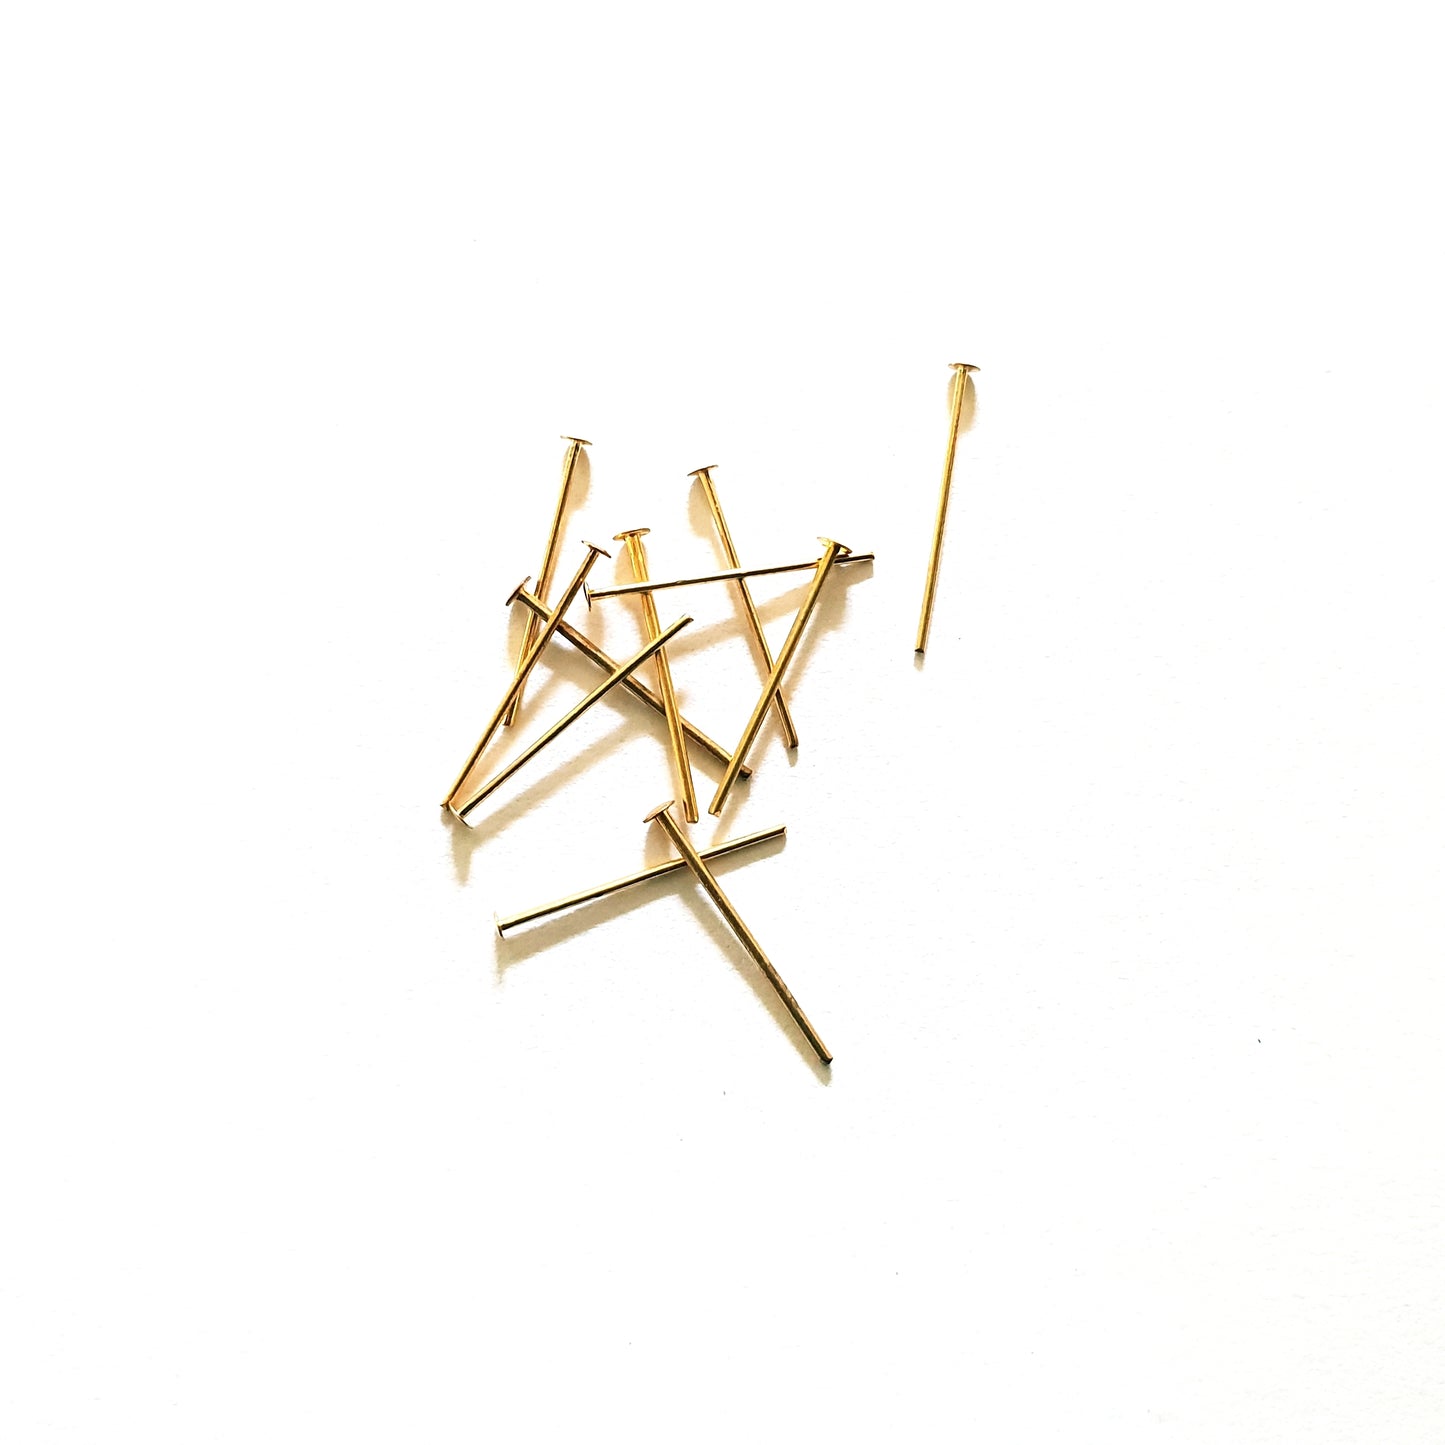 Head Pin 19mm (3/4") Gold Plate